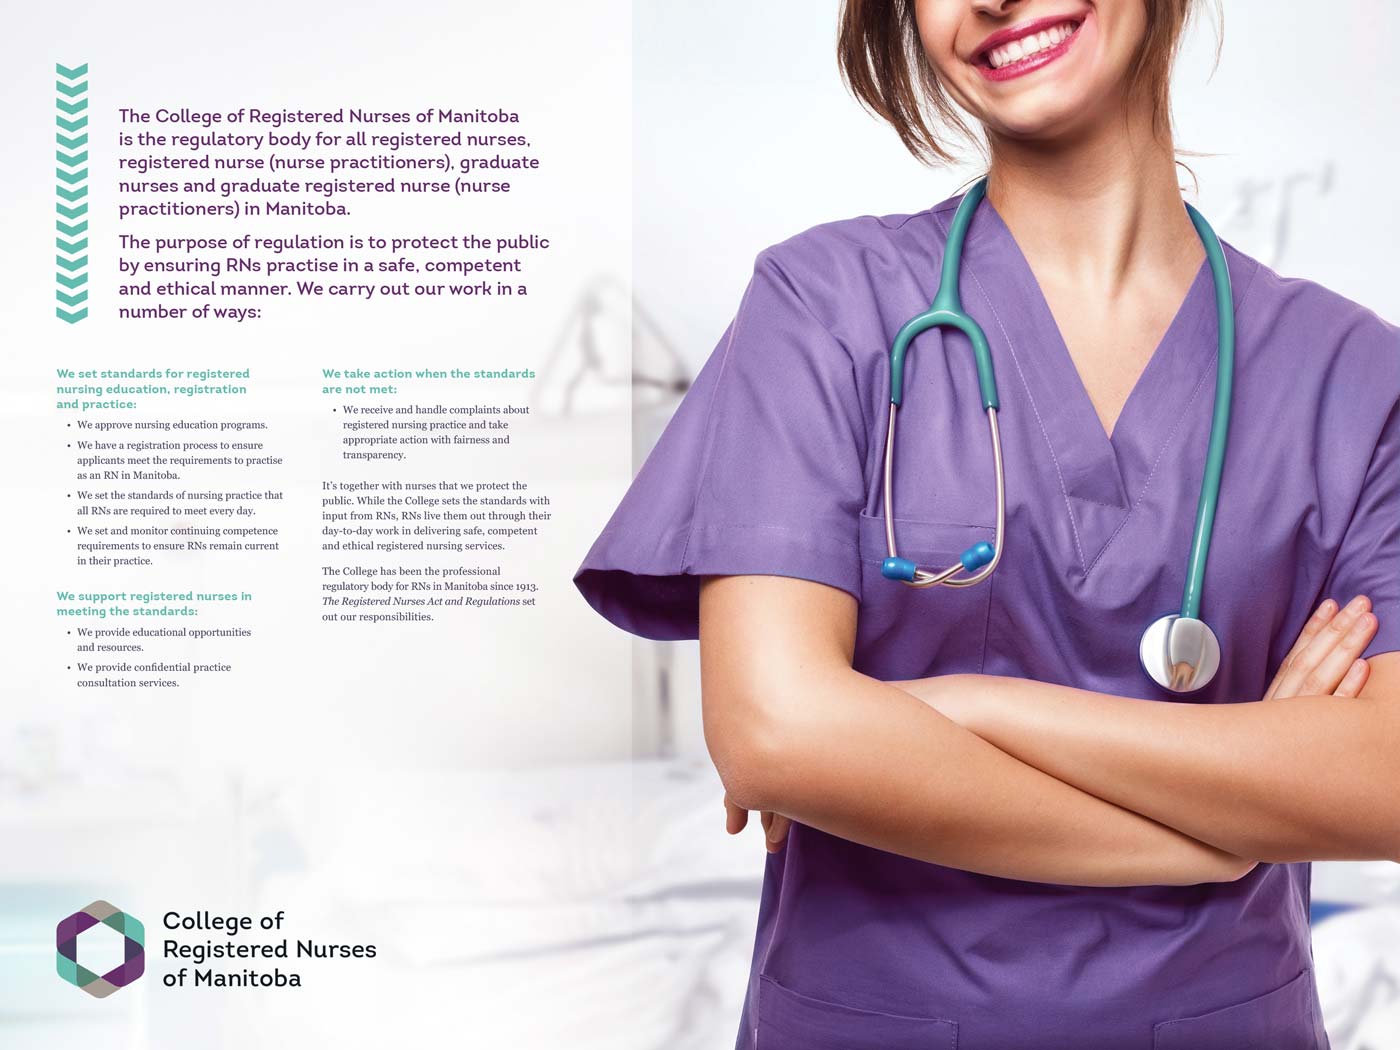 Inside the College of Registered Nurses of Manitoba annual report